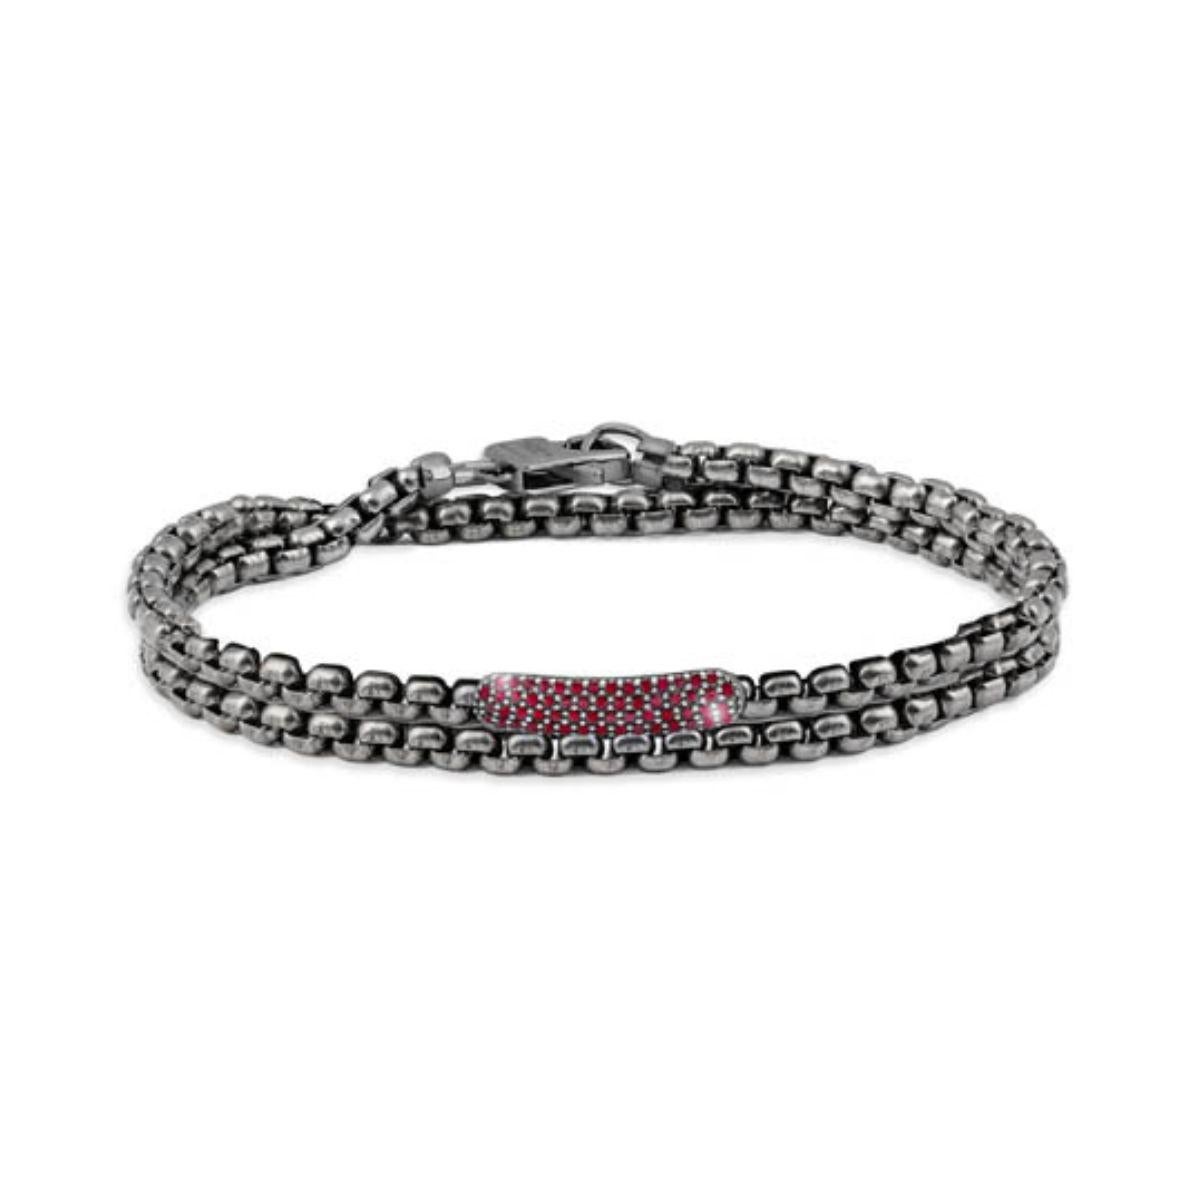 Men's Black Rhodium Plated Sterling Silver Catena Baton Bracelet with Rubies, Size M For Sale